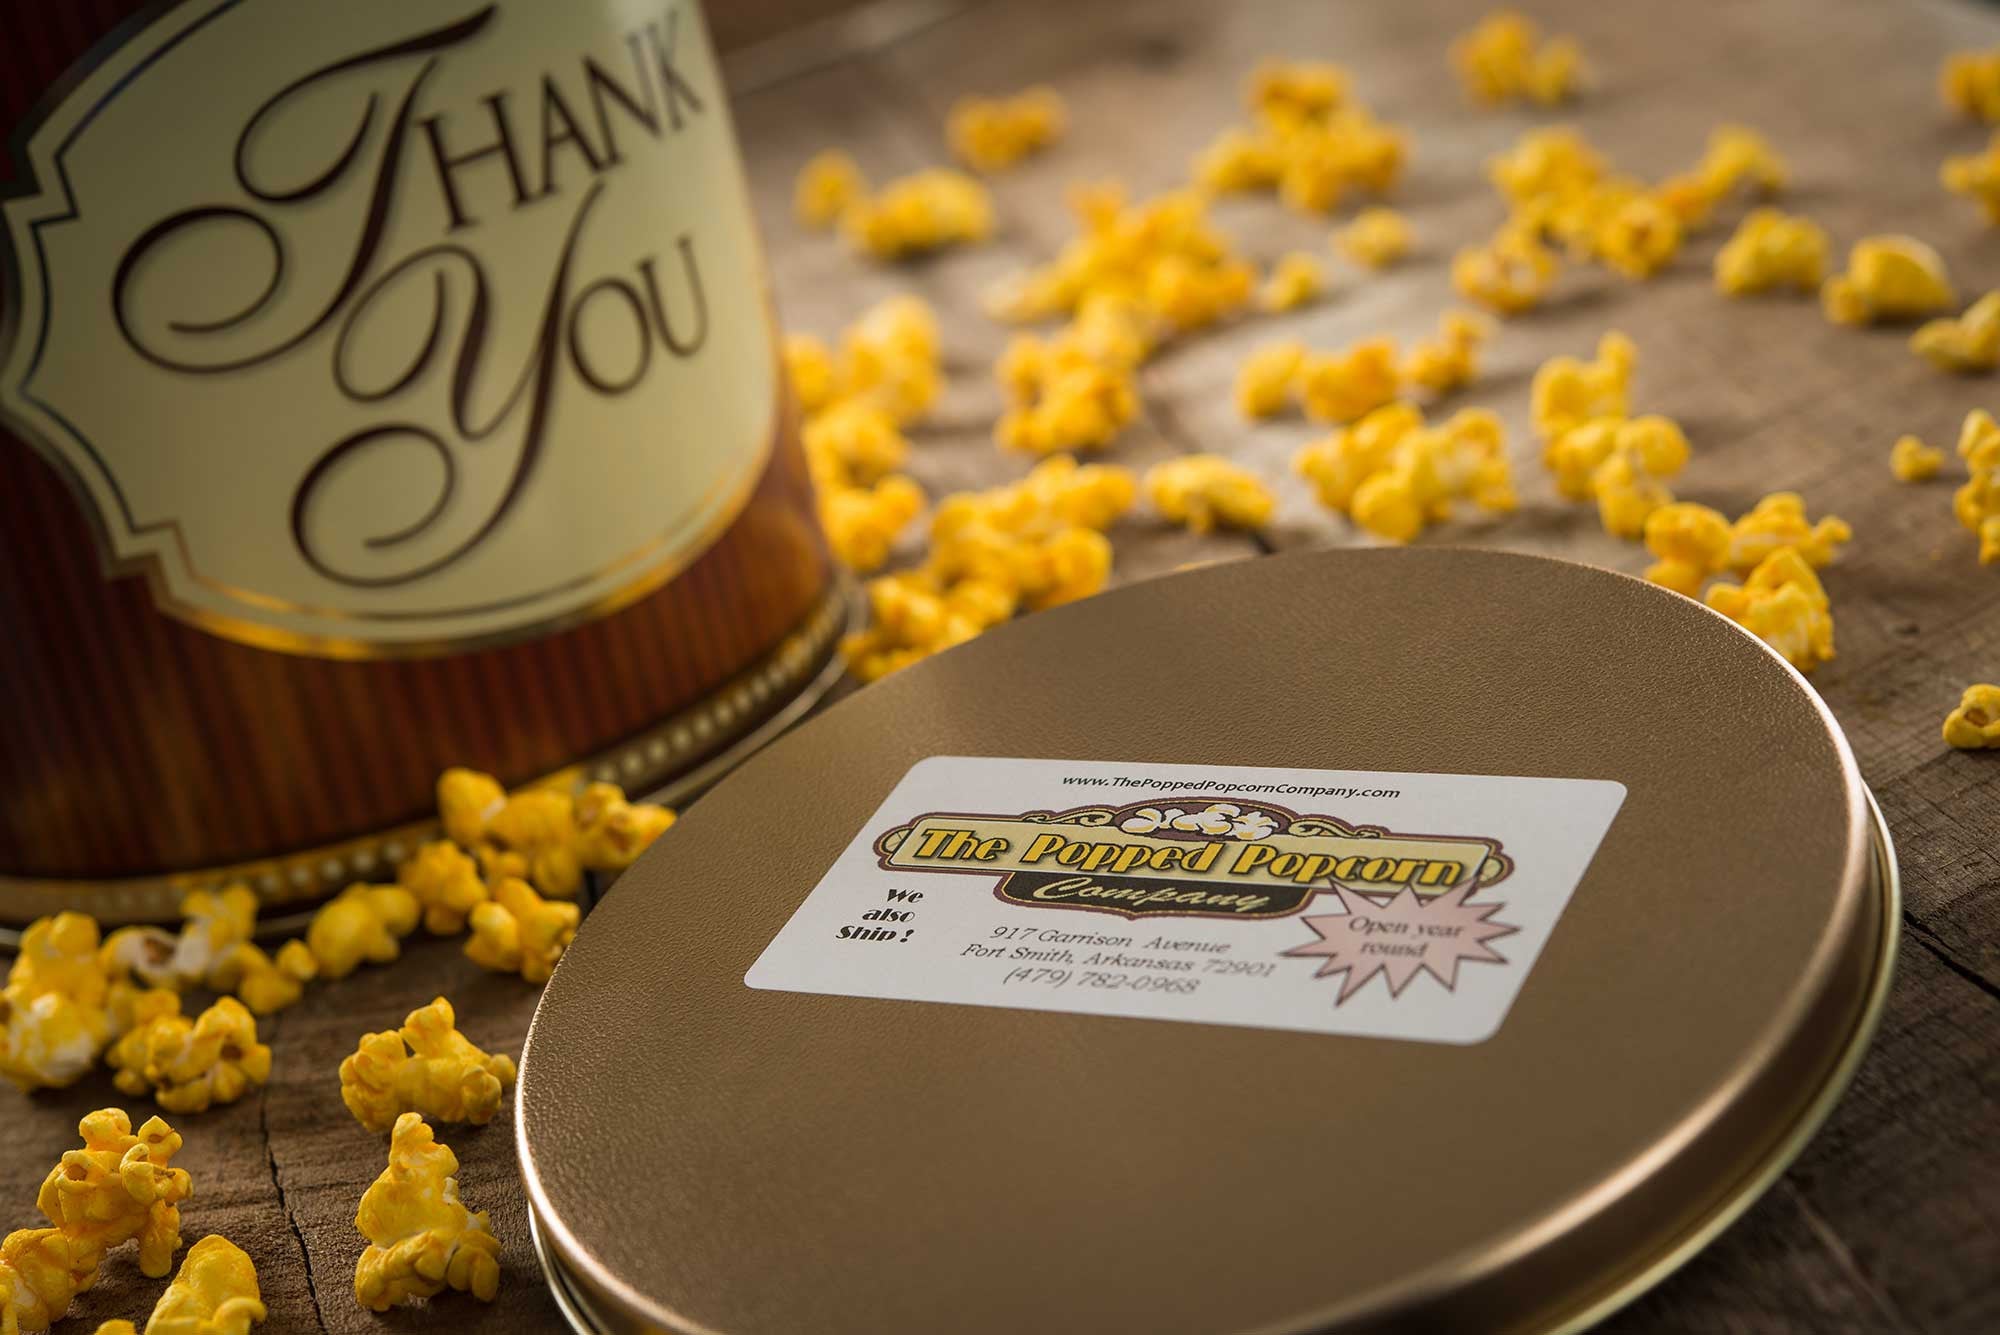 Real customers share their experiences, ratings, testimonials & reviews of buying our fresh, gourmet flavored popcorn online & having it shipped to their door.